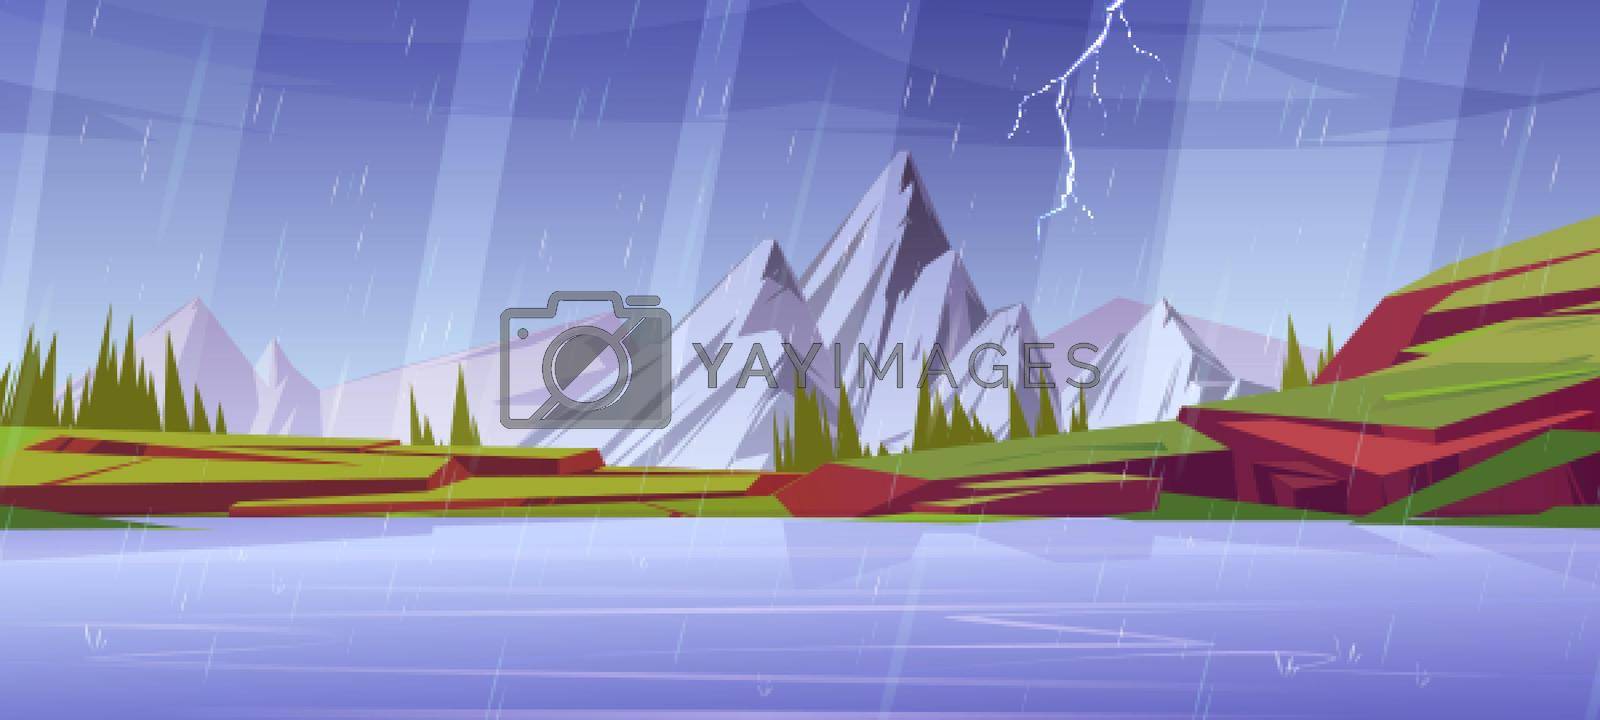 Rain and lightnings at mountain nature landscape with water pond, snowy peaks, green grass on rocks and conifers. Cartoon background with thunderstorm weather on lake, scenery view Vector illustration